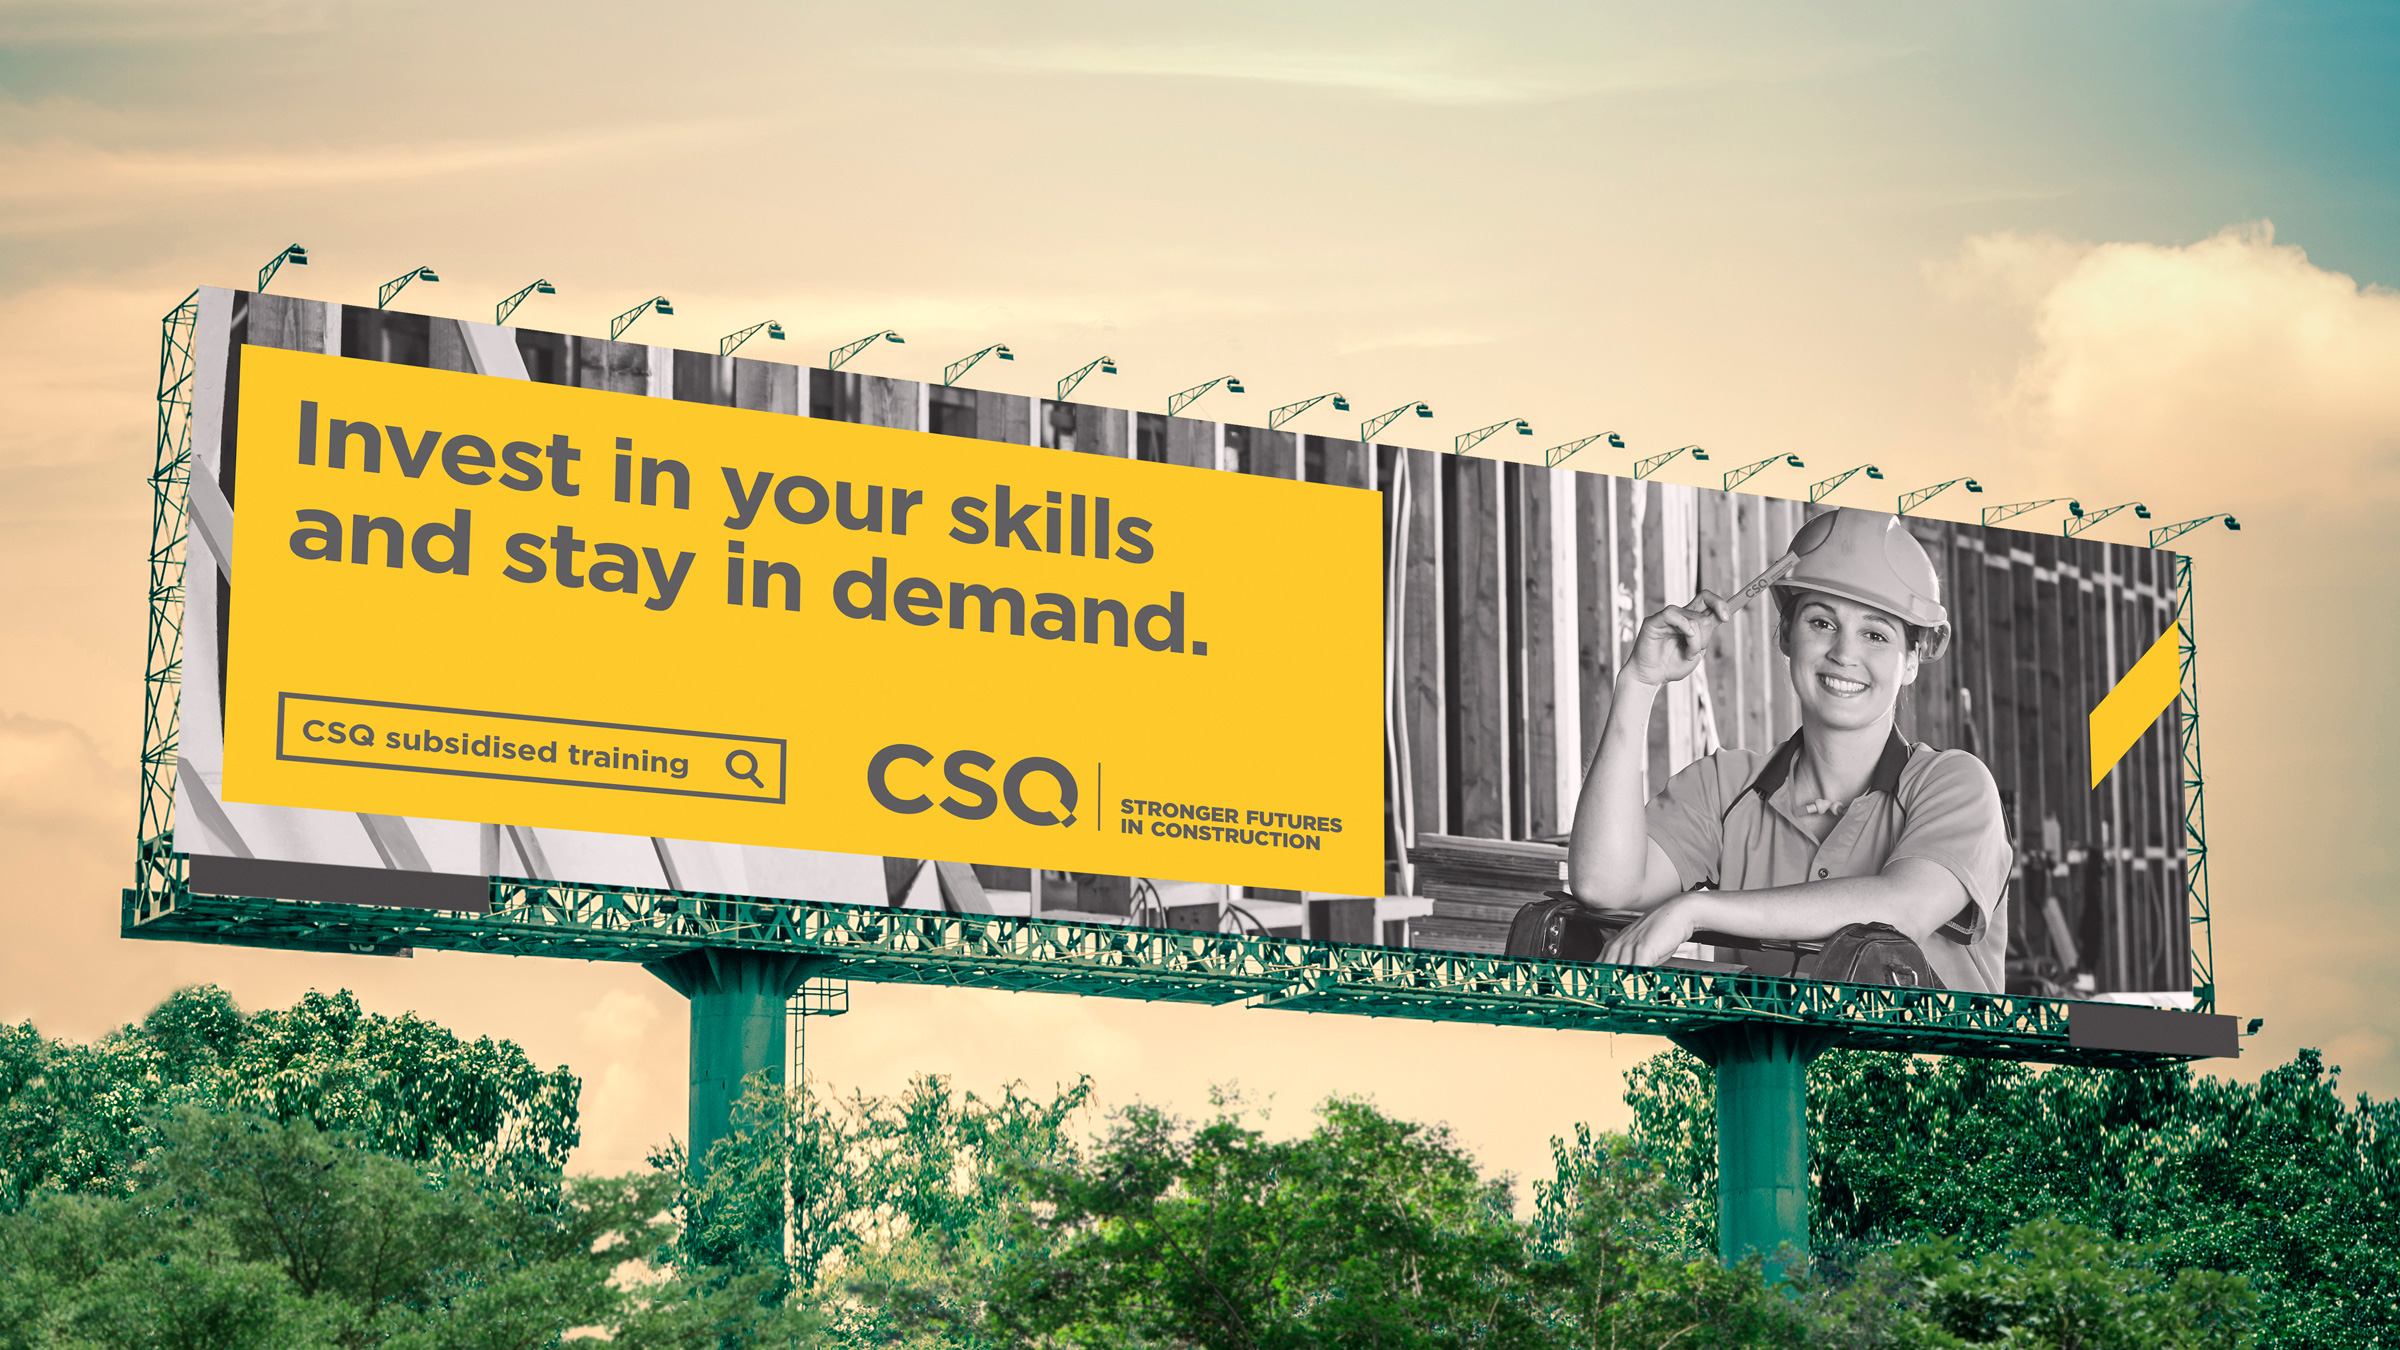 A billboard ad part of the CSQ advertising campaign. It features a tradie tapping her hard hat with a pencil. The copy reads "Invest in your skills and stay in demand